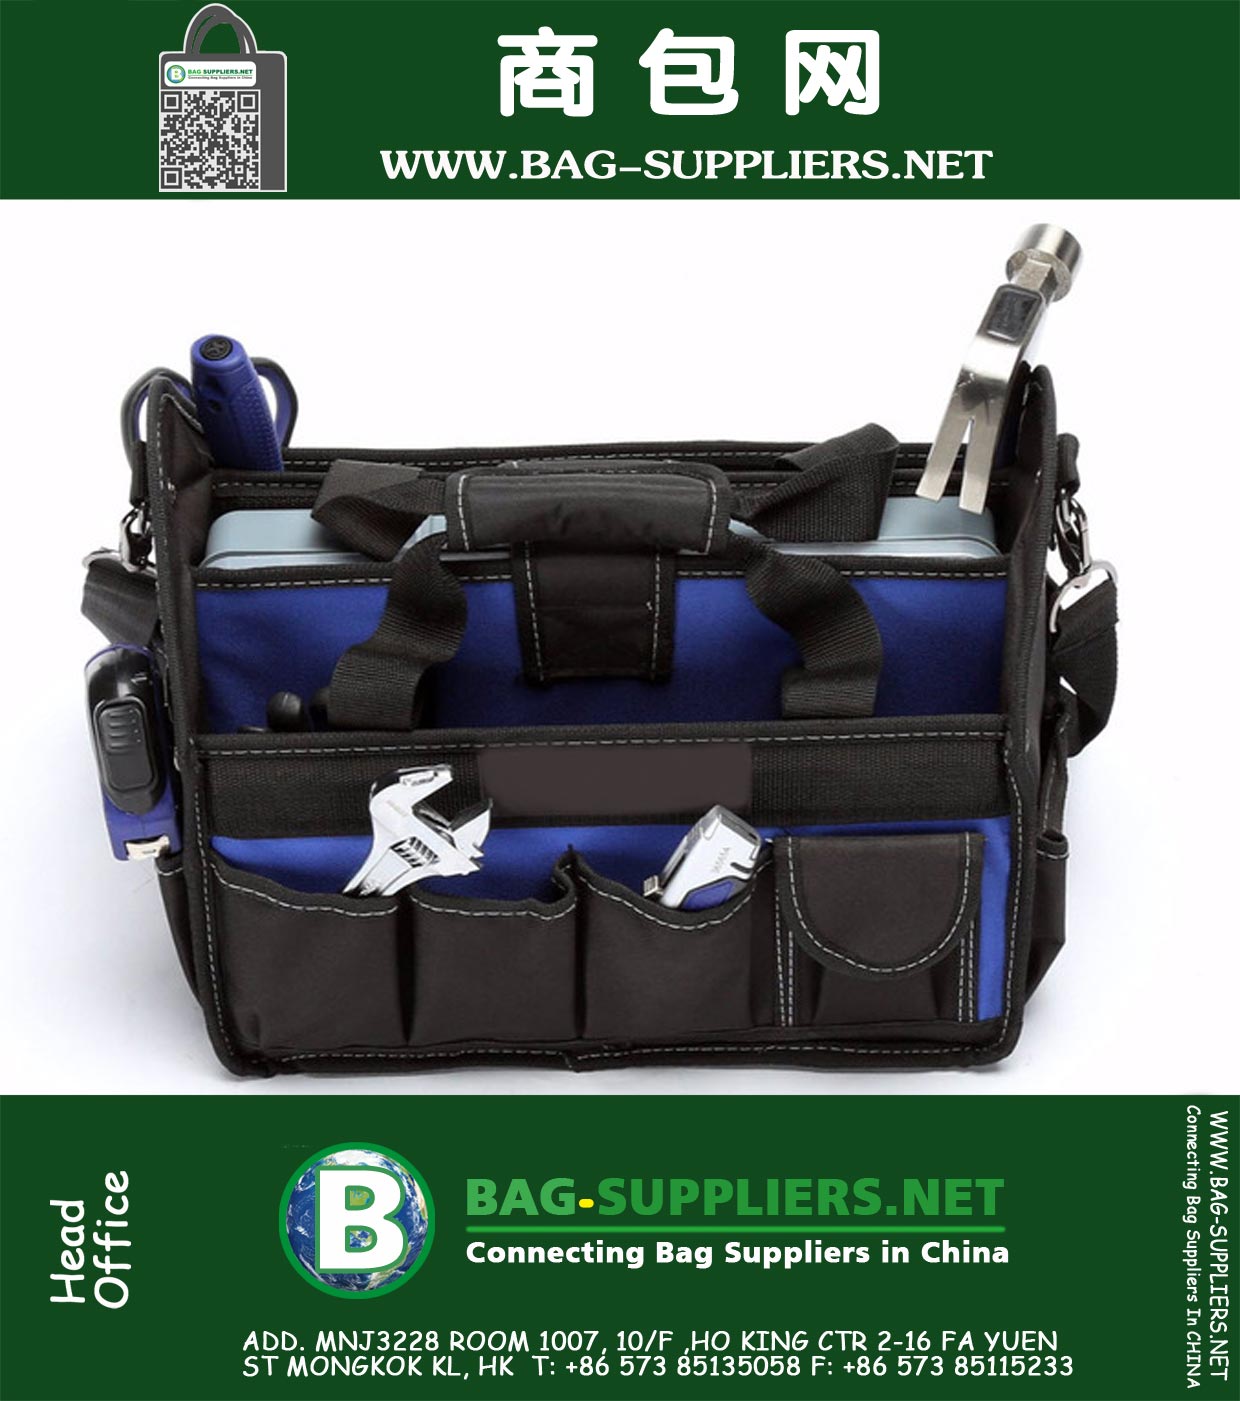 Includes knife, hammer, pliers, wrench, scissors, tape measure, saw, screwdriver, plastic case, and tool bag Soft-grip design reduces vibration and hand fatigue The convenient tool bag with a detachable shoulder strap and pockets Comes with 1 plastic